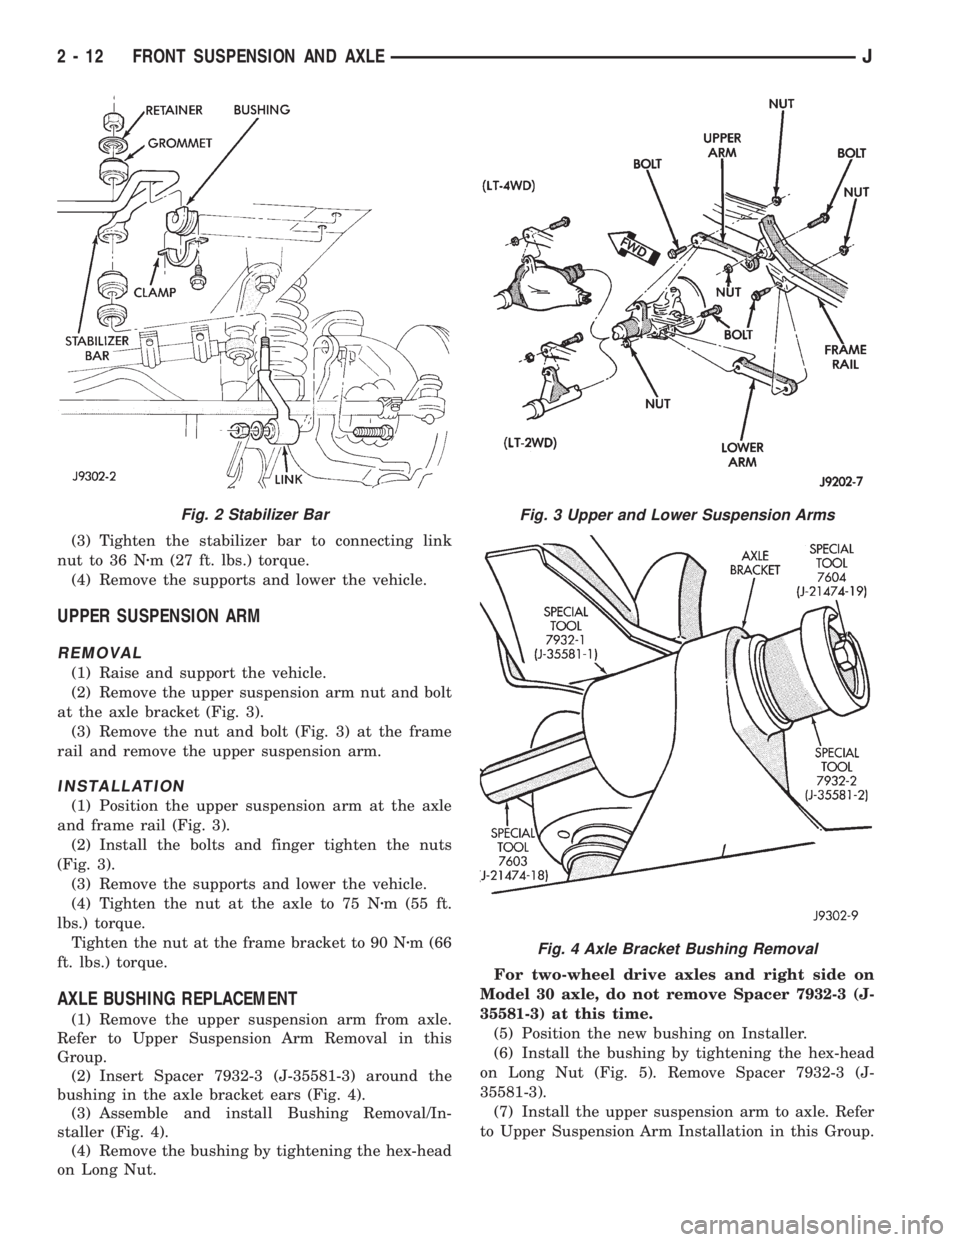 JEEP YJ 1995  Service And Repair Manual (3) Tighten the stabilizer bar to connecting link
nut to 36 Nzm (27 ft. lbs.) torque.
(4) Remove the supports and lower the vehicle.
UPPER SUSPENSION ARM
REMOVAL
(1) Raise and support the vehicle.
(2)